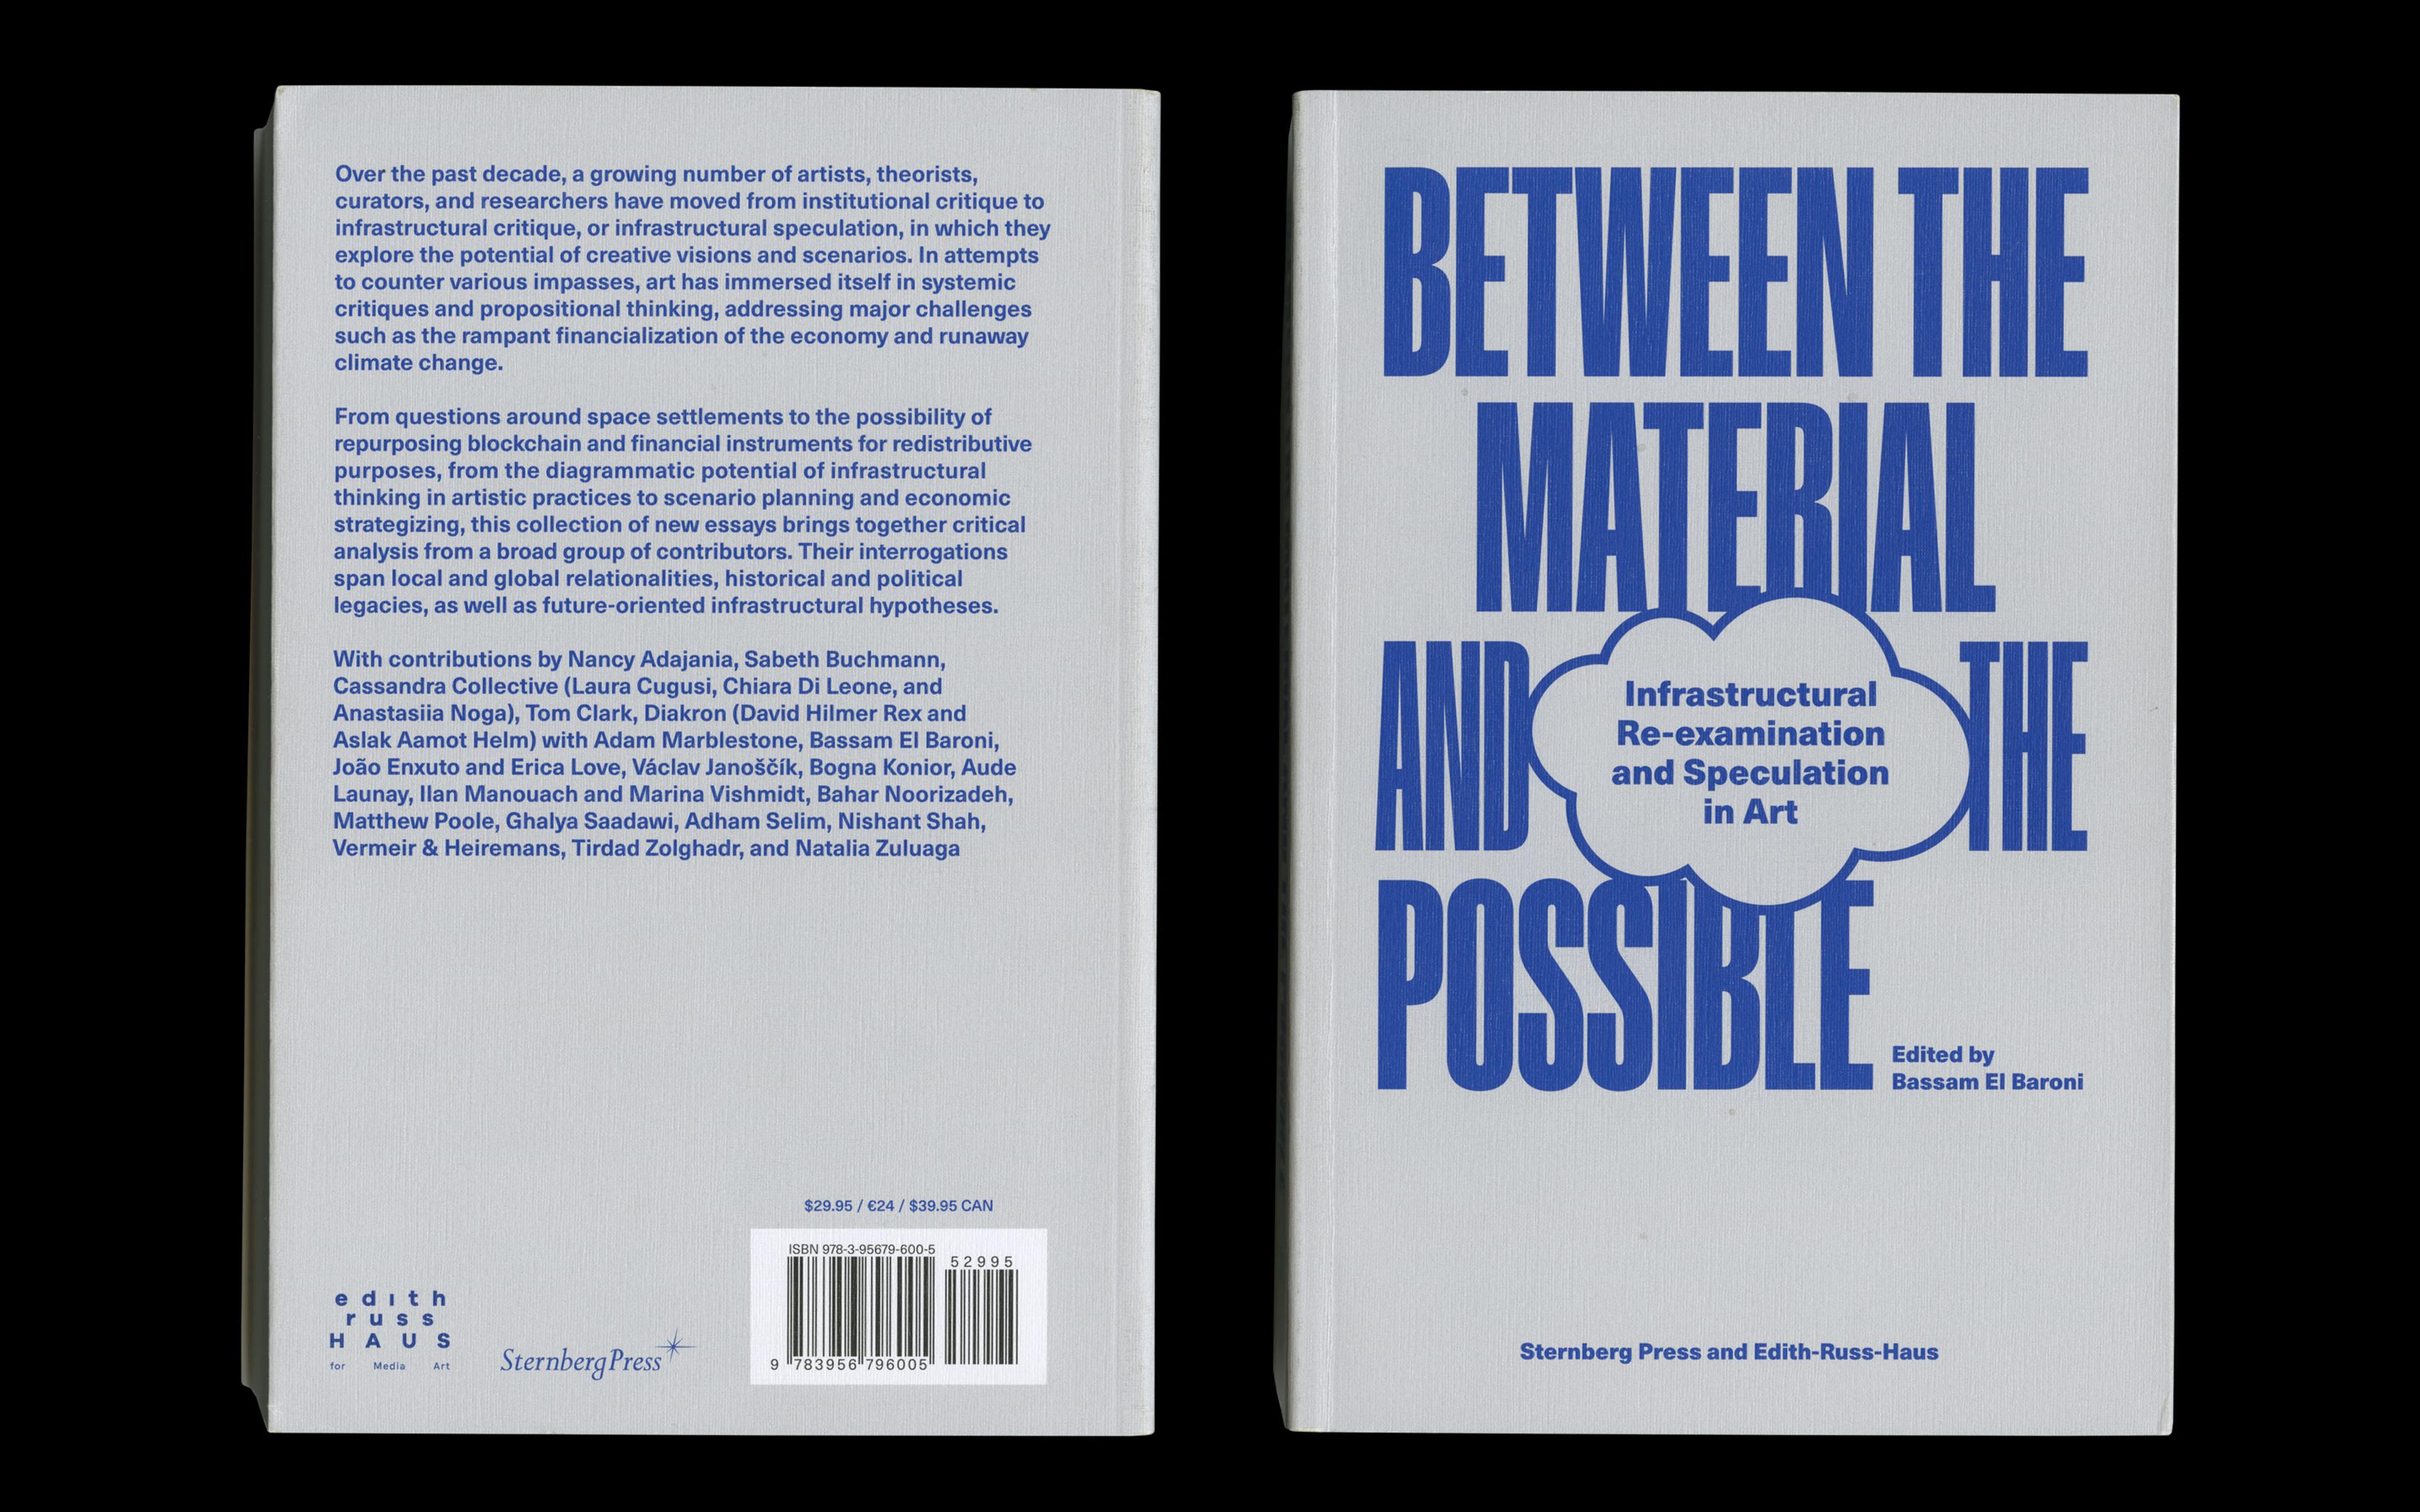 Scan of front and back cover of 'Between the Material and the Possible' edited by Bassam El Baroni